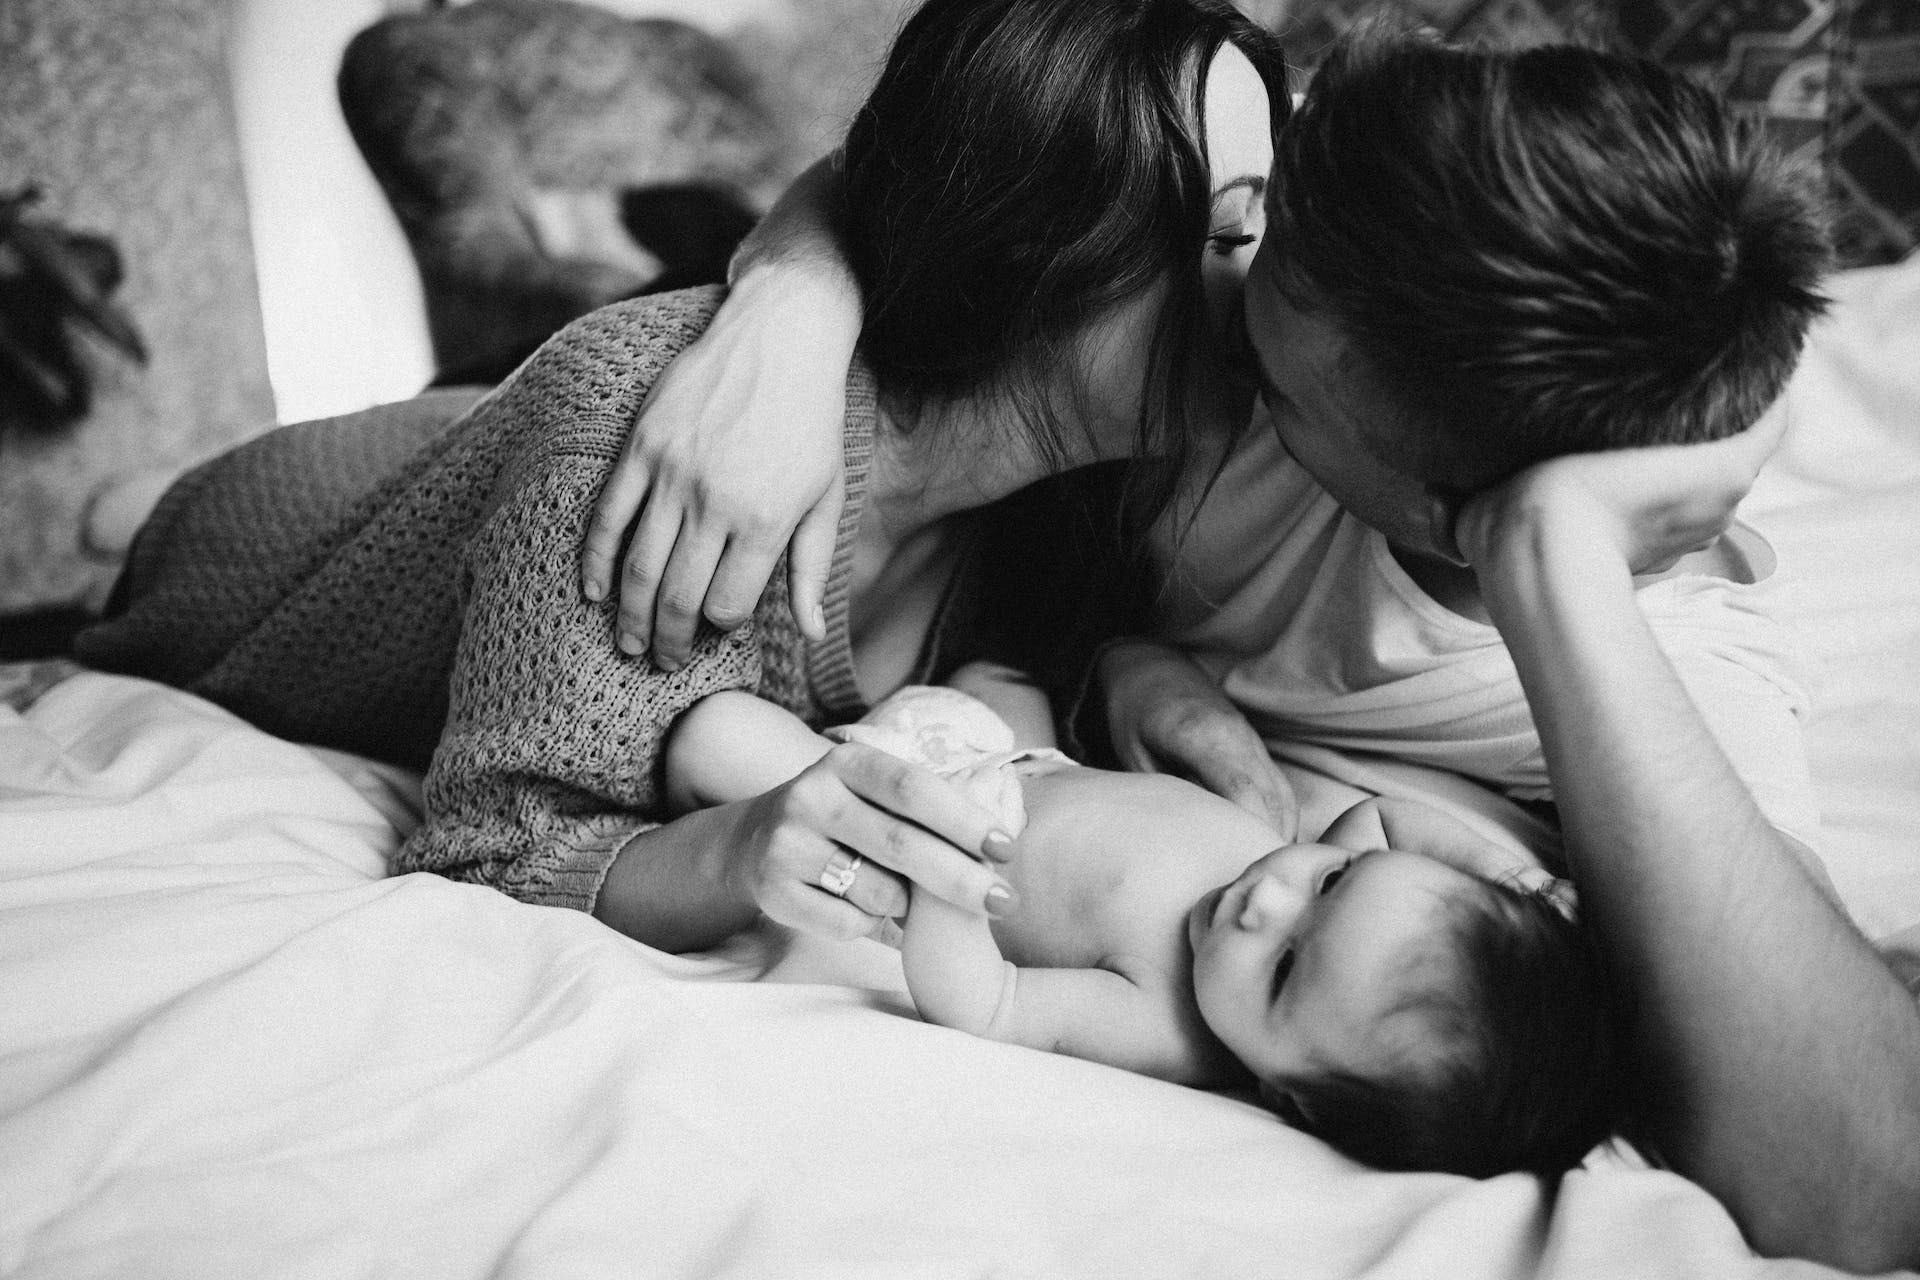 Couple with their newborn baby on bed | Source: Pexels